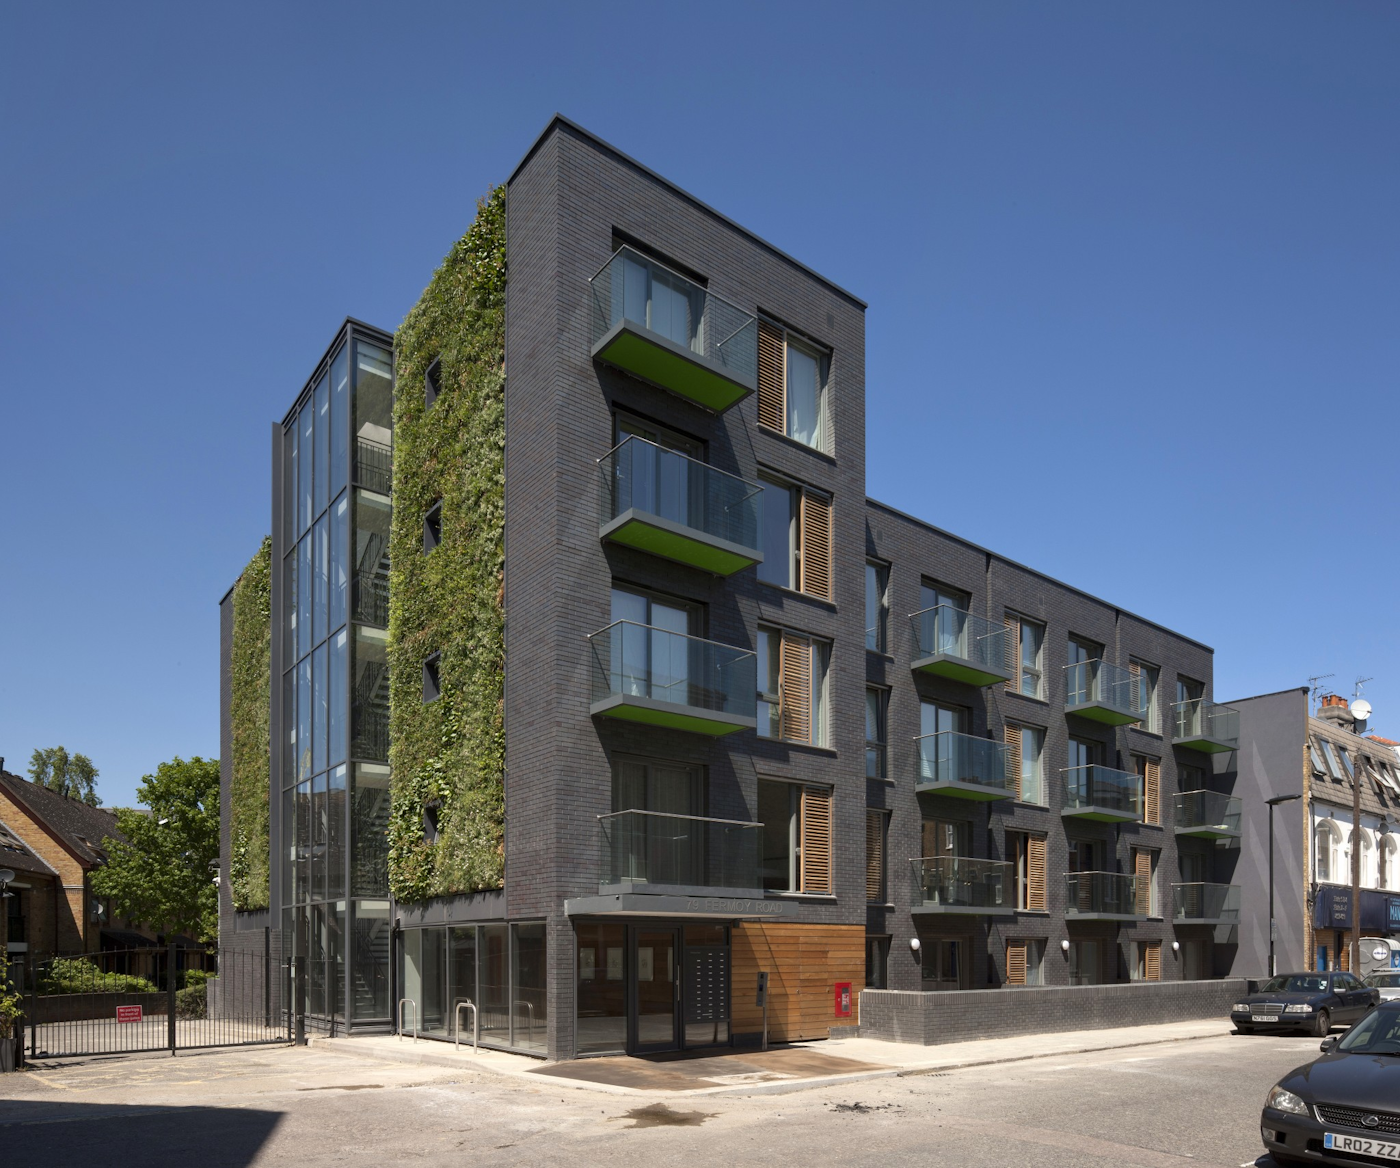 Fermoy Road Residential Development With Two Evergreen Living Walls